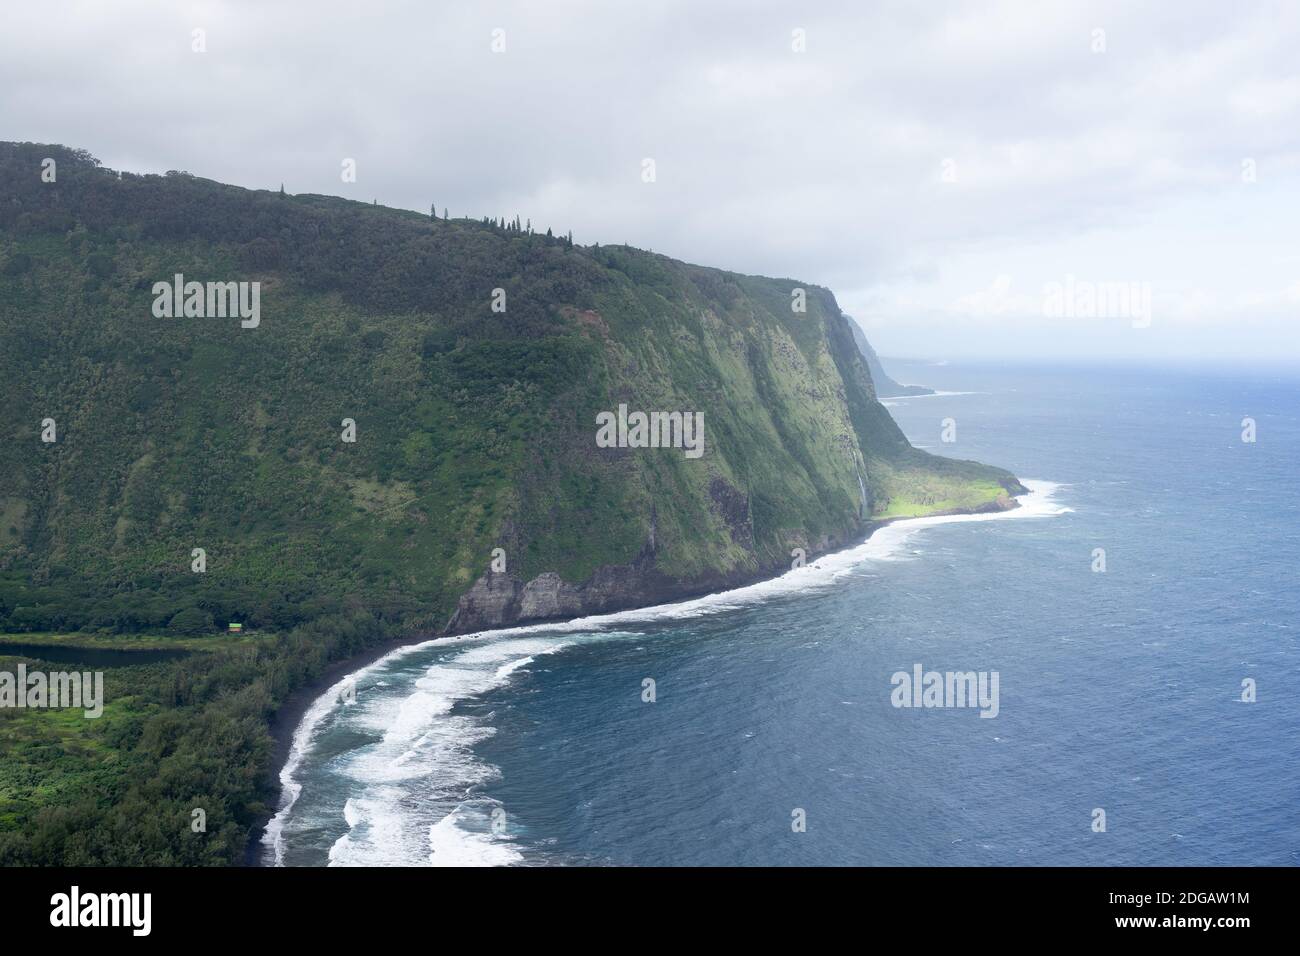 Waipio valley with coast and cliffs, viewed from above on a cloudy day - Hawaii island, Hawaii, USA Stock Photo